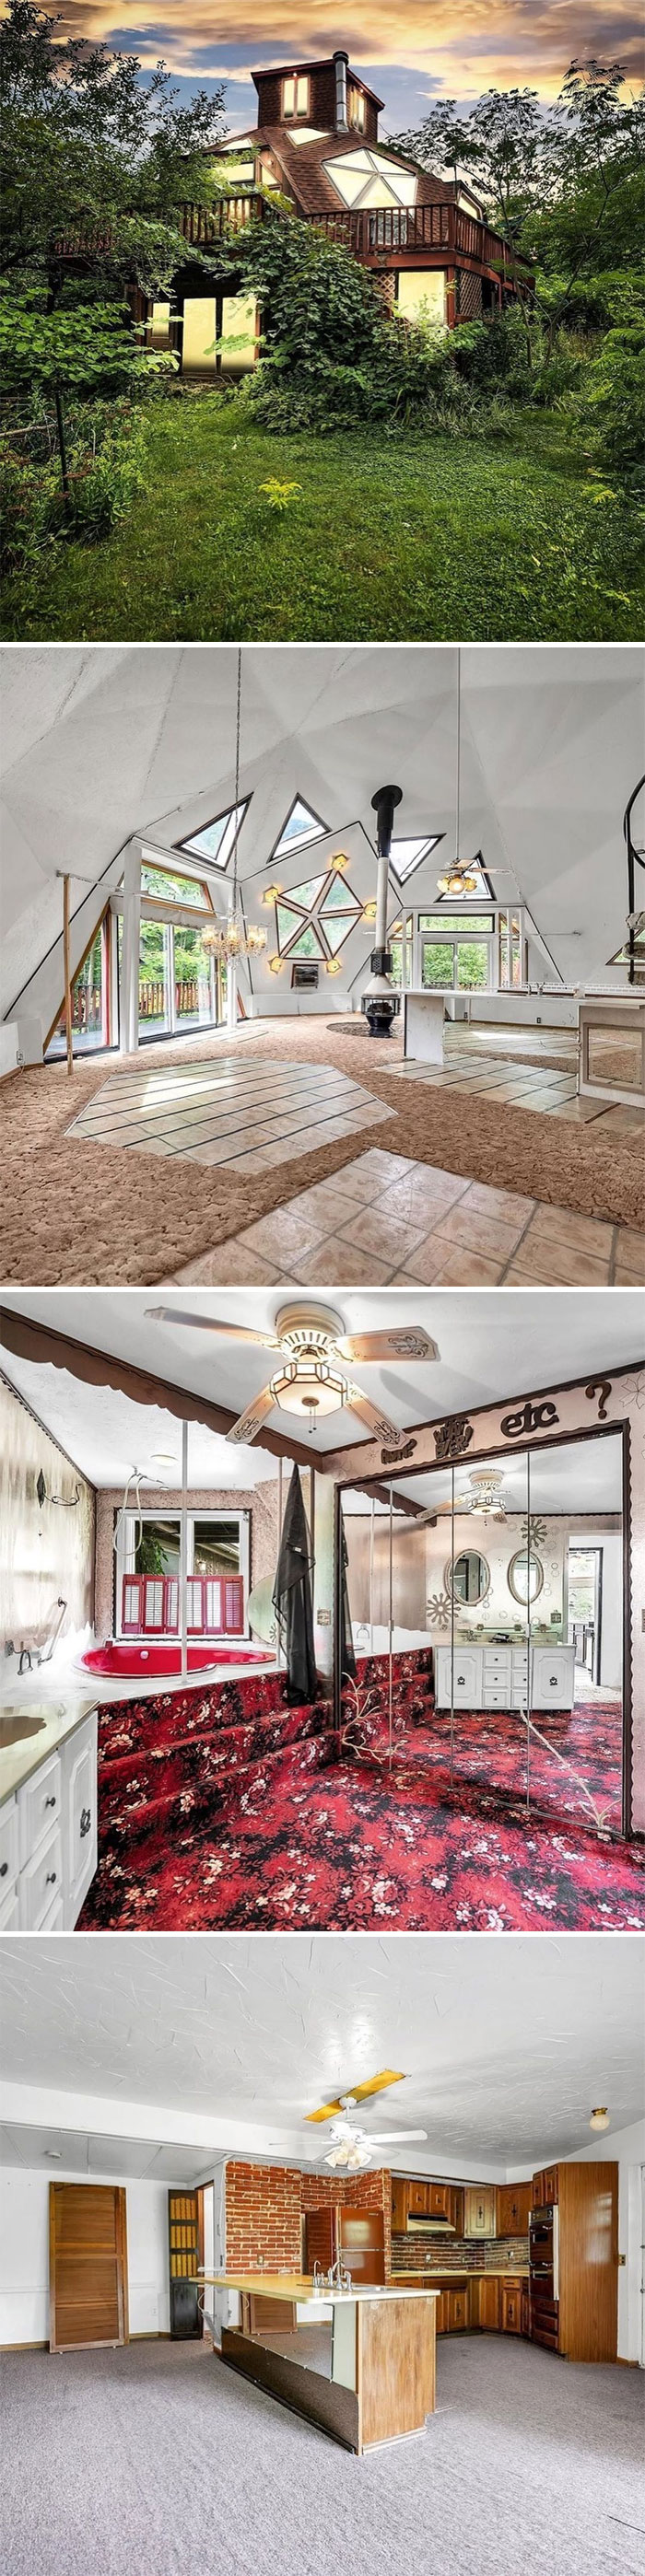 It’s Been A While Since We’ve Had A Dome Home And This One Is Really Cool And Huge (Over 6k Square Feet)(Thats Whats She Said). Currently Listed For $299,000 In Painesville, Oh. 11 Bd. 5 Ba. Follow Zillowgonewild For The Coolest Homes!!! Link In Bio For The Listing